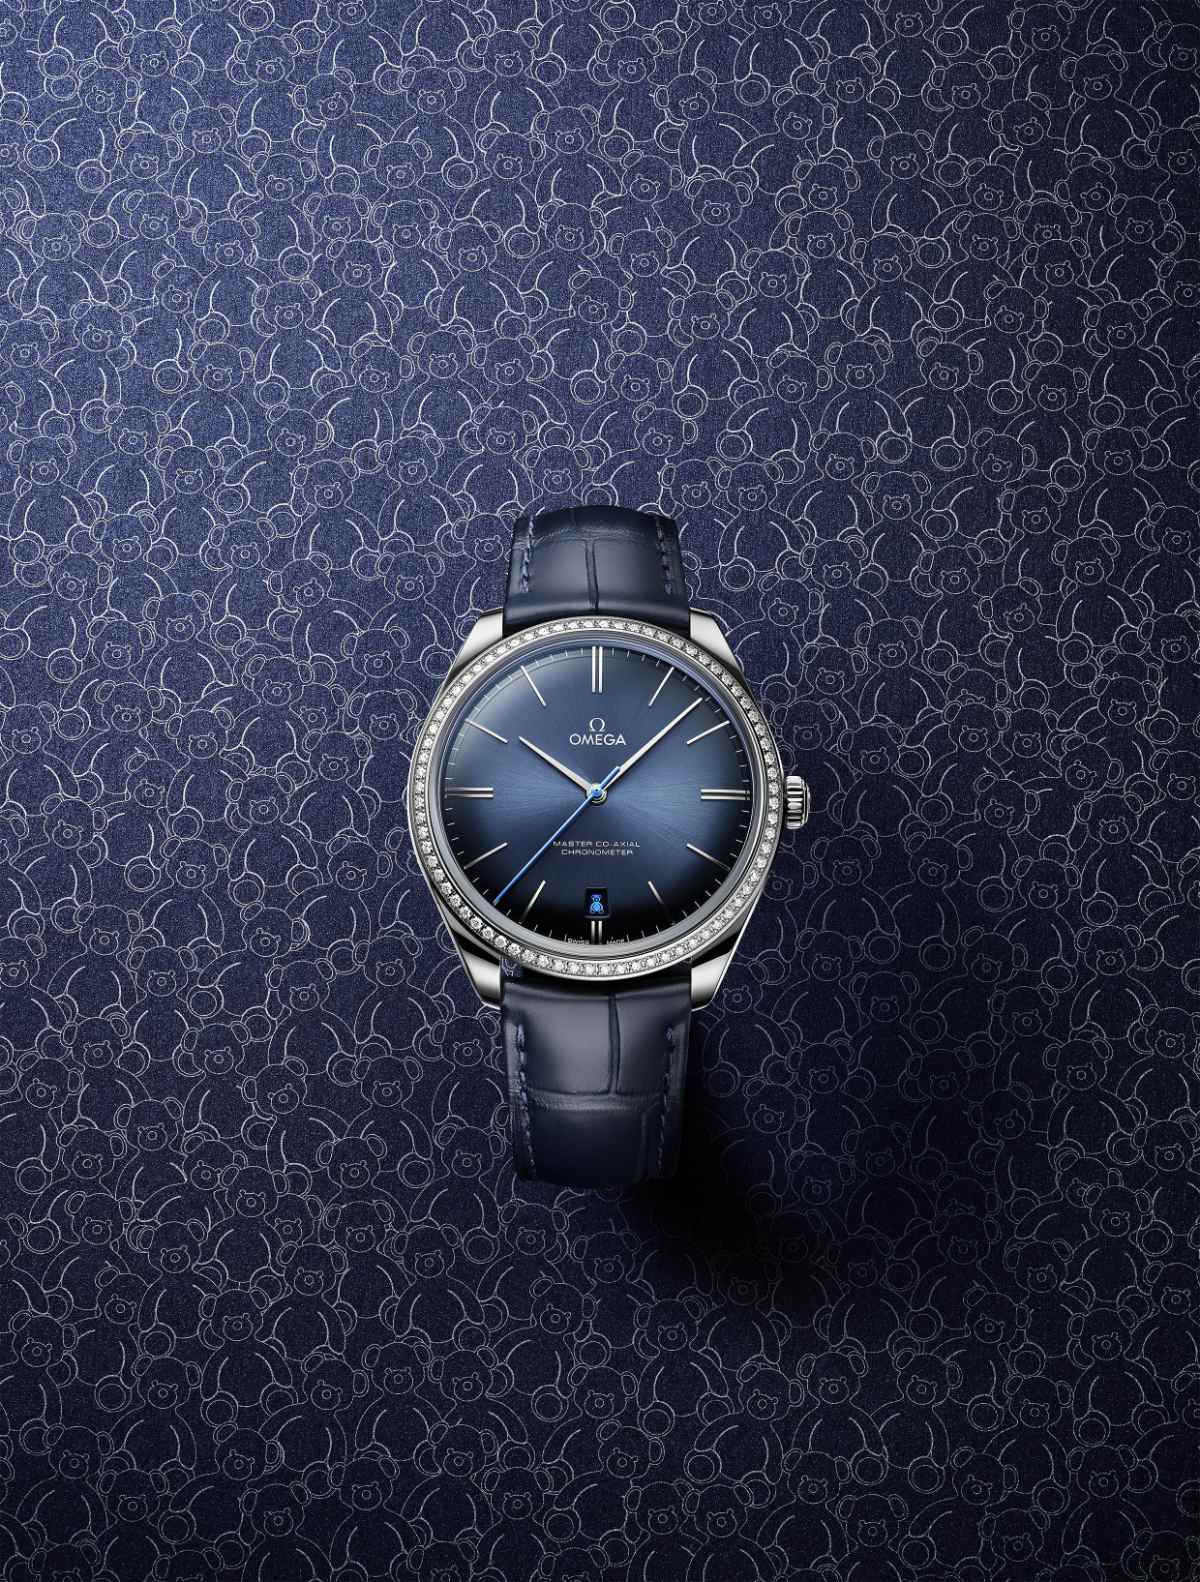 OMEGA: Two watches for one great cause